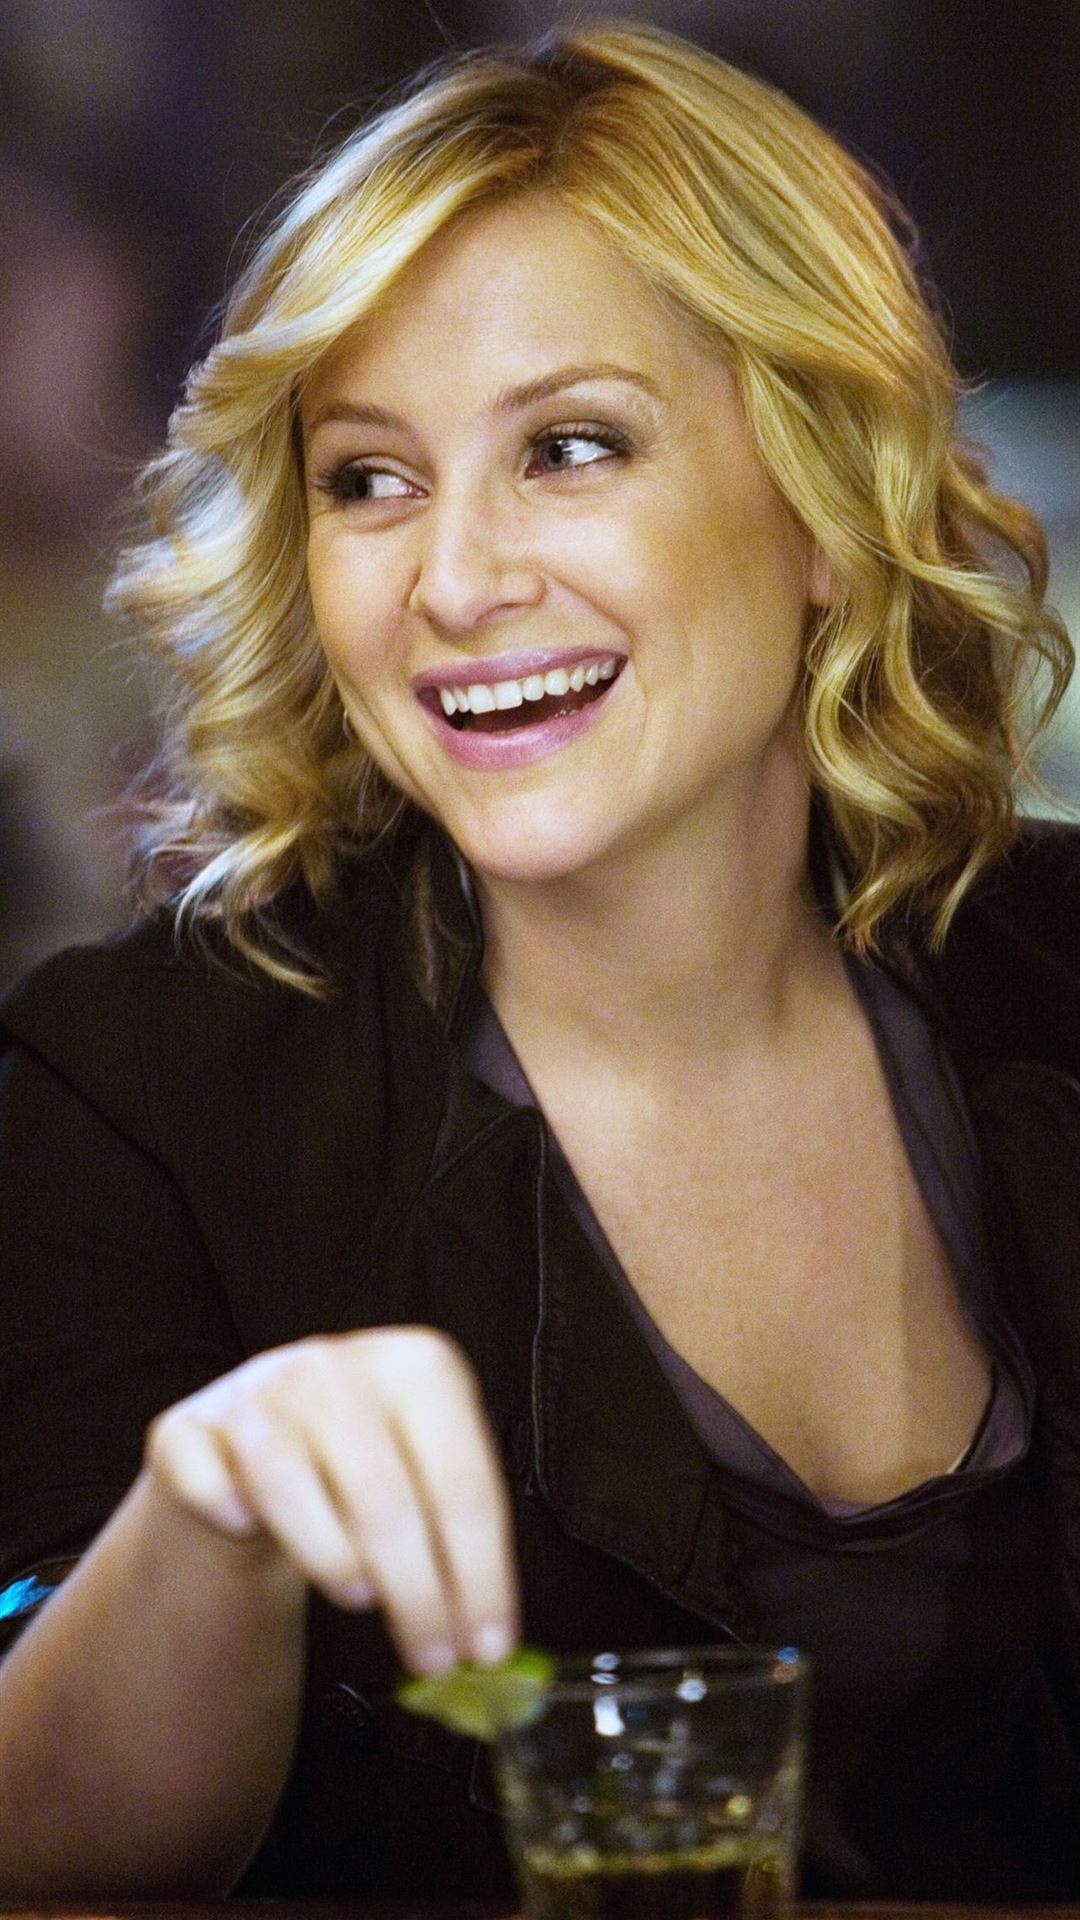 Greys Anatomy iPhone wallpapers, Mobile background, On-the-go viewing, TV series fandom, 1080x1920 Full HD Phone